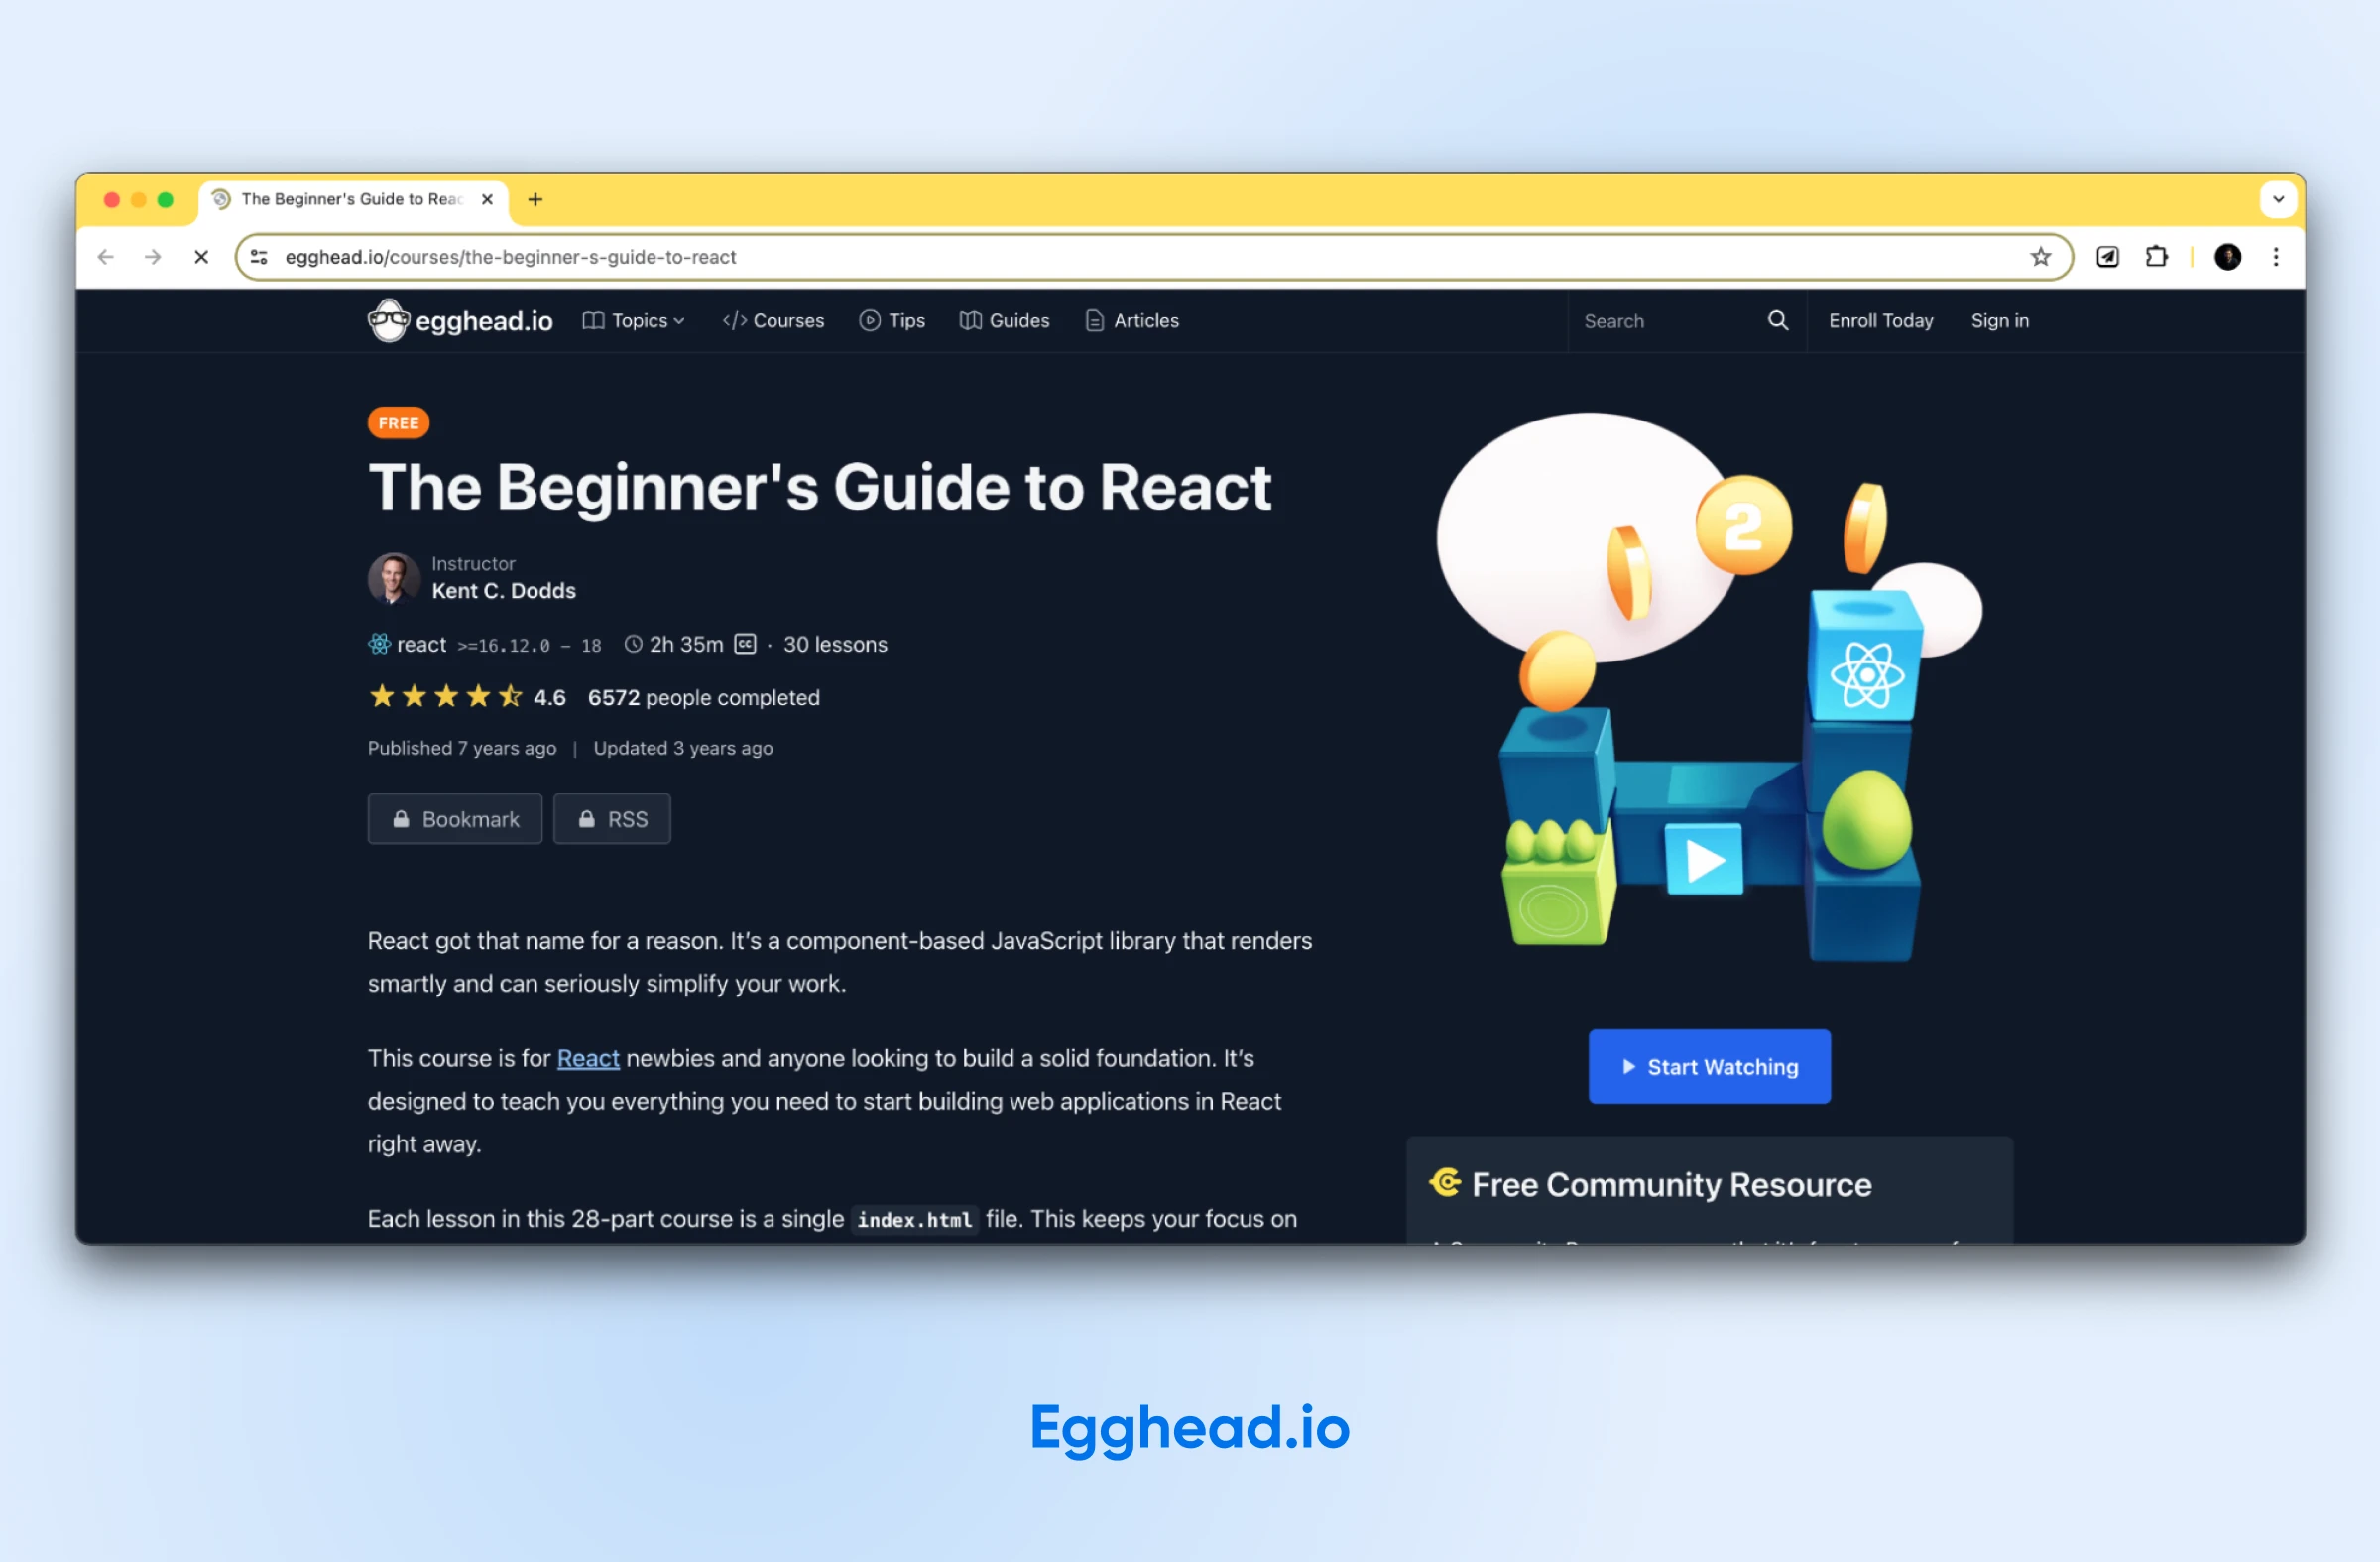 Egghead.io's web page for "The Beginner's Guide to React" offers a video and user reviews